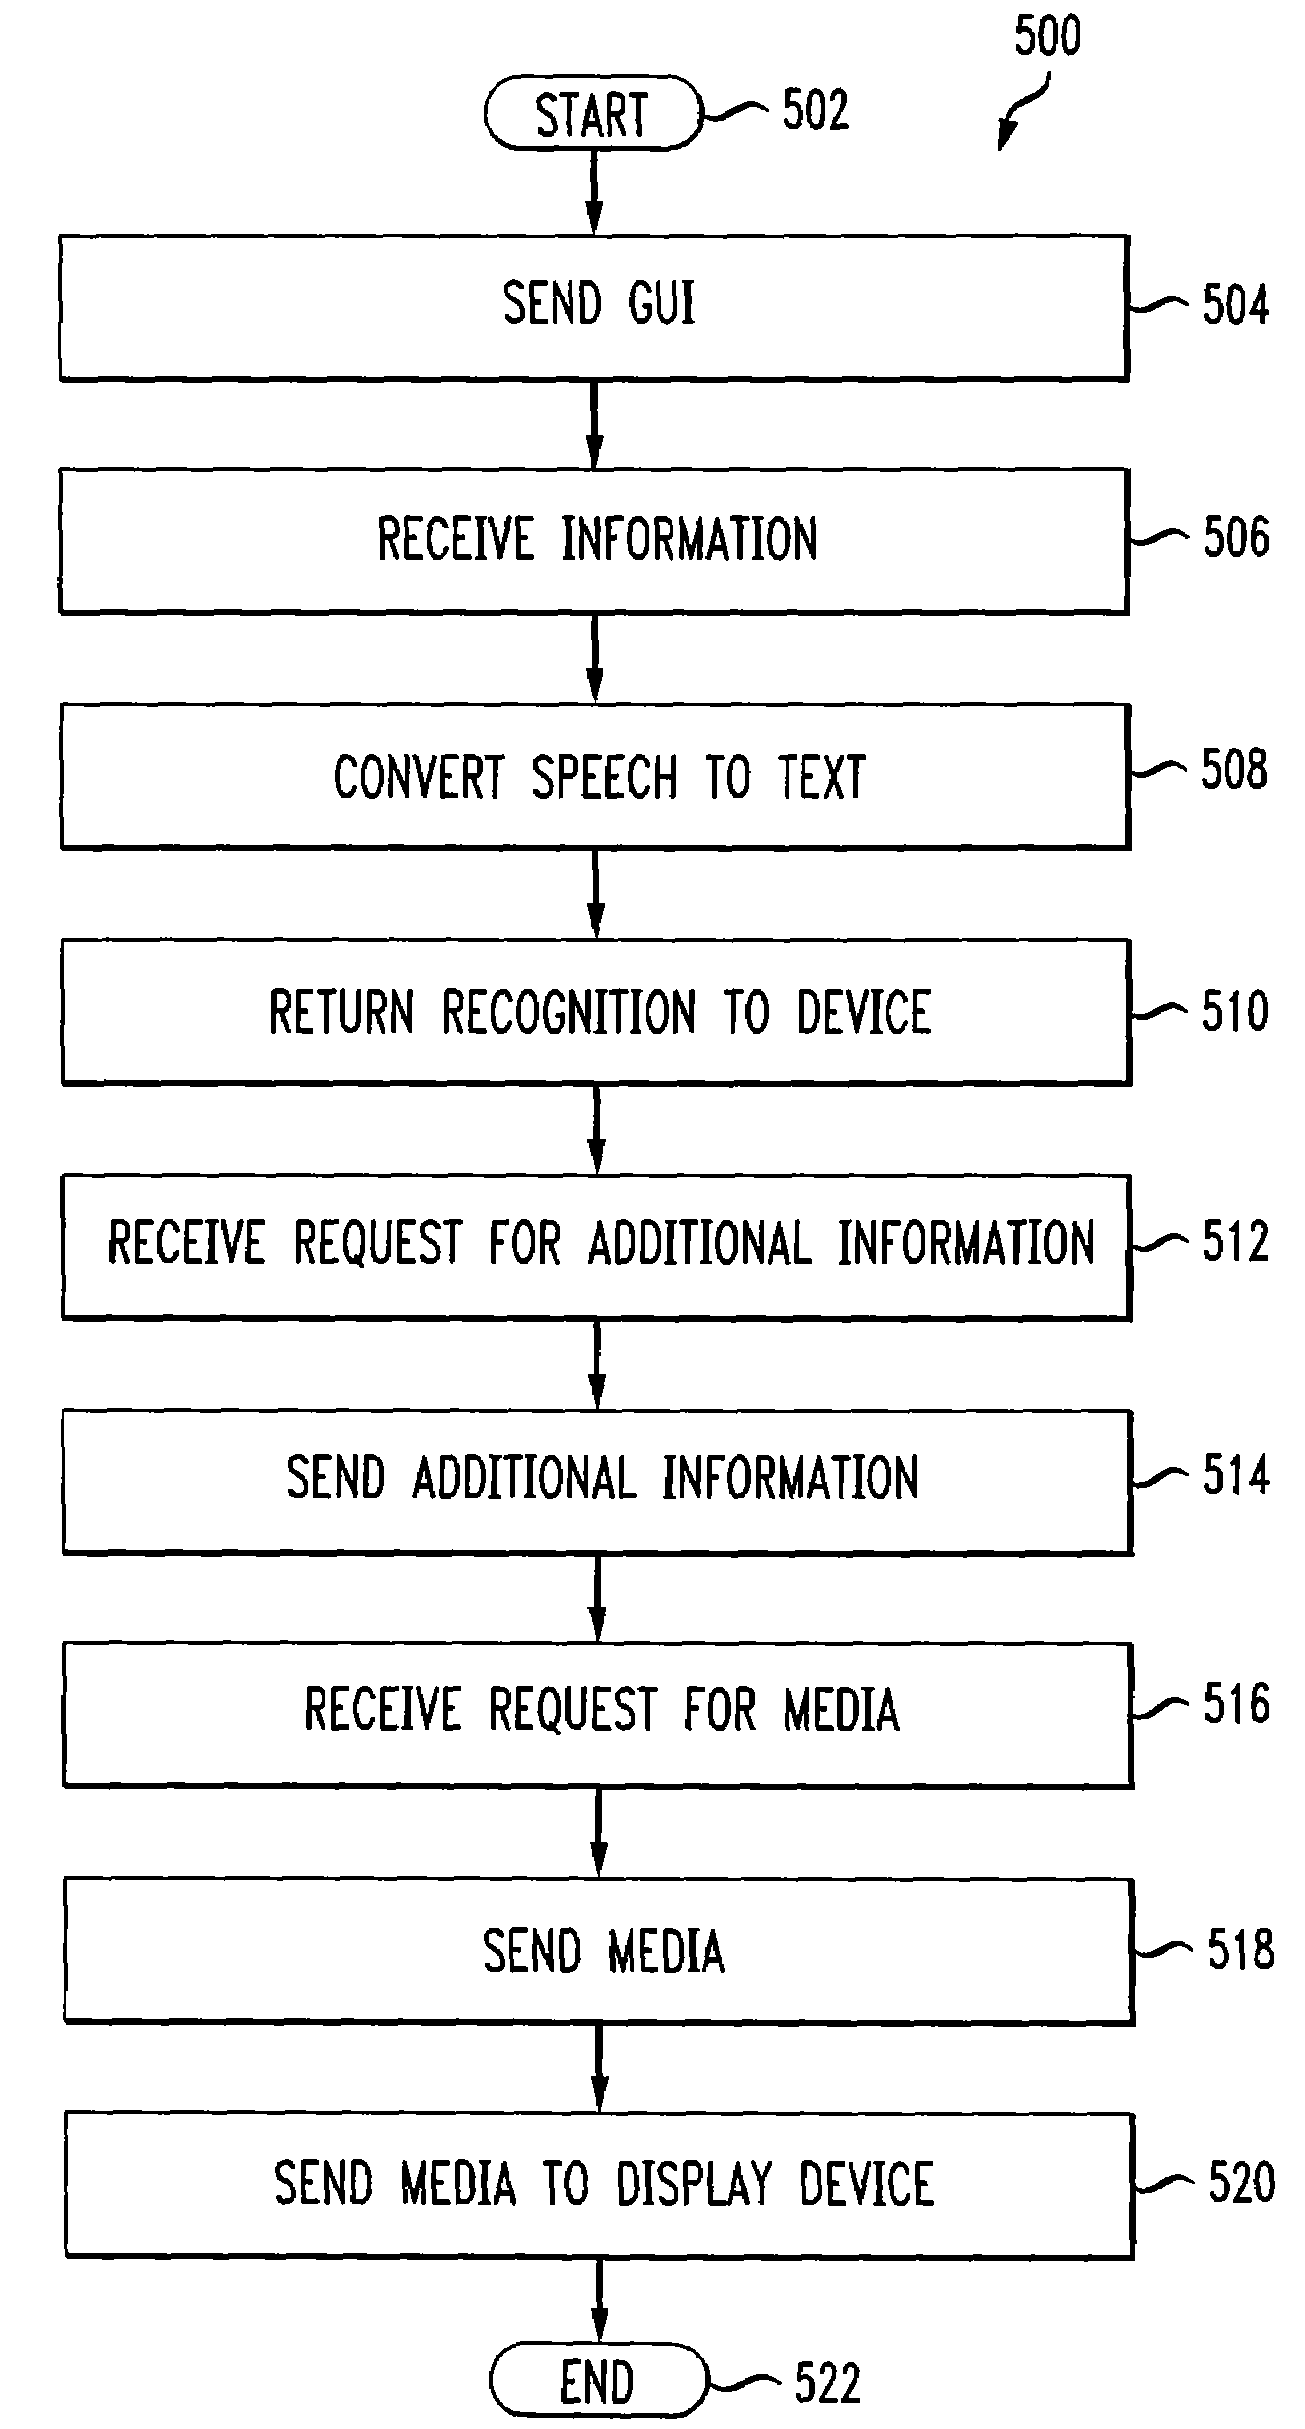 Multimodal portable communication interface for accessing video content